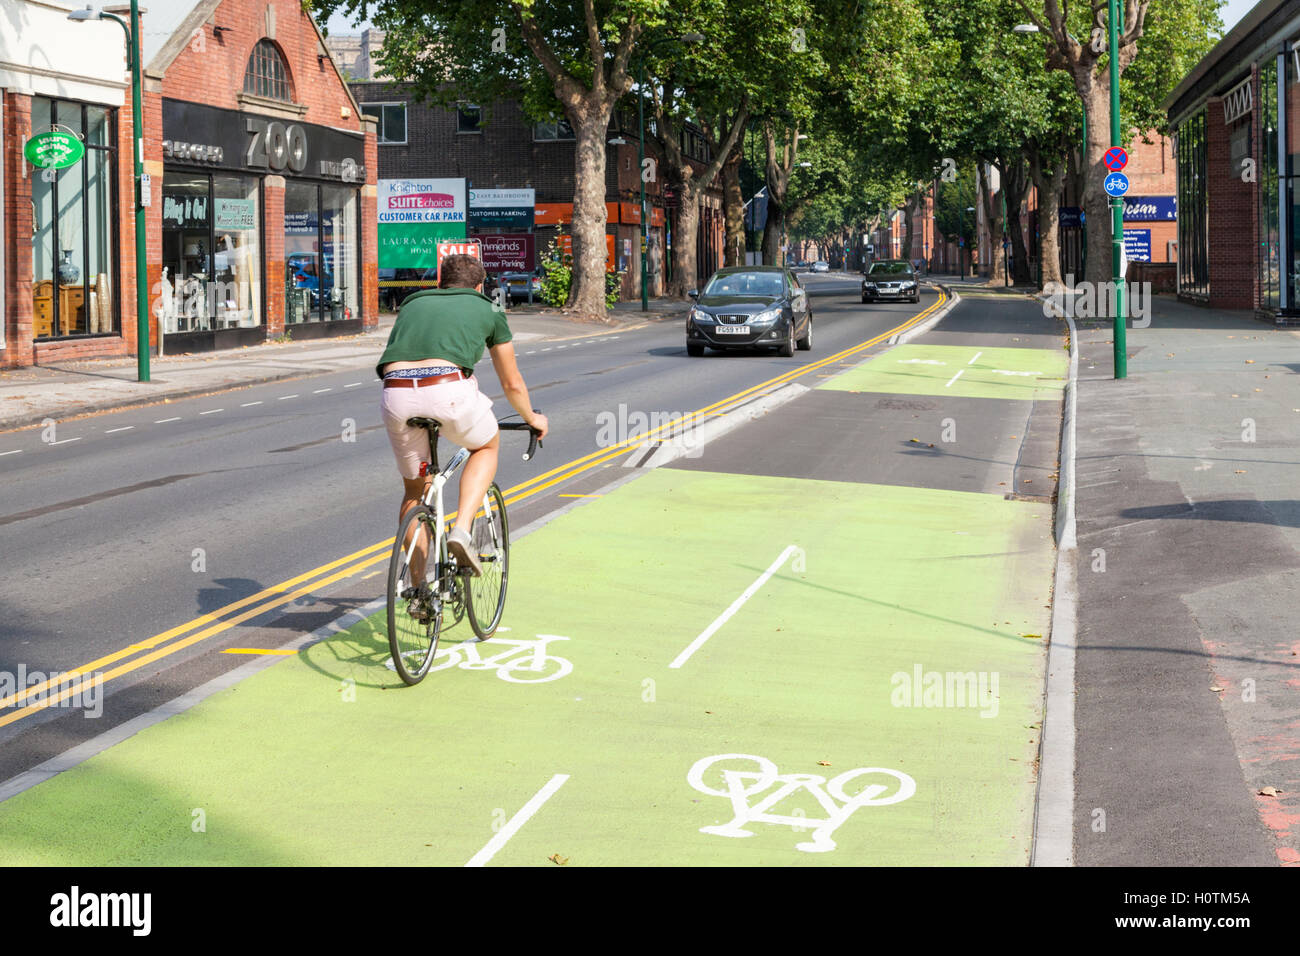 Cycle lane marked with two distinct lanes for cycling in to and out of the city, Nottingham, England, UK Stock Photo